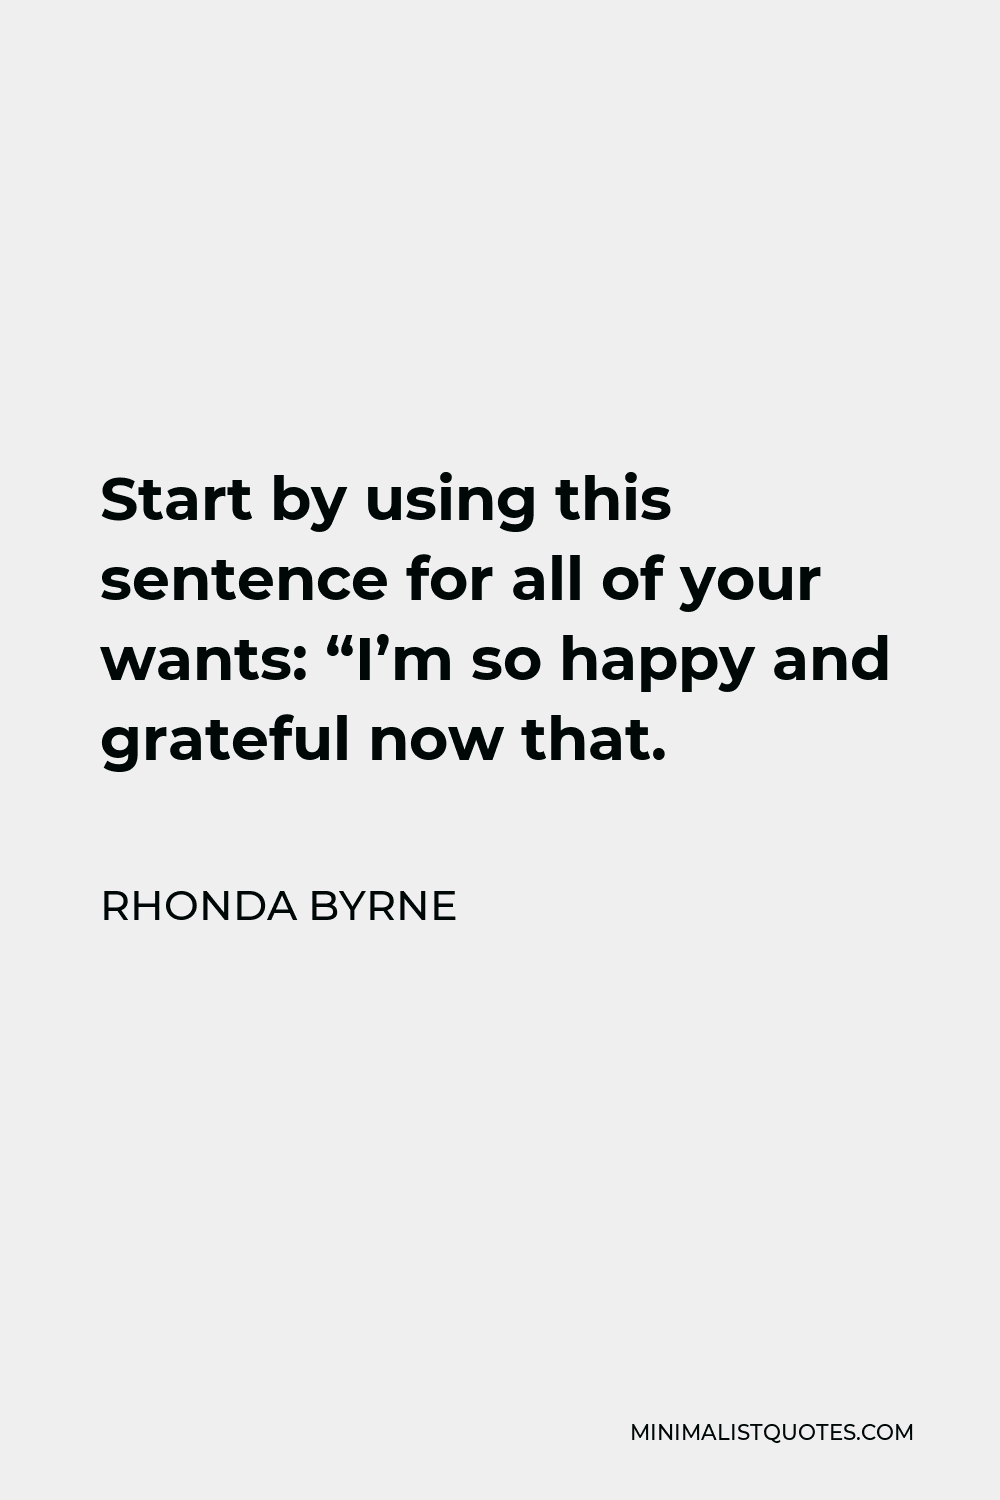 Rhonda Byrne Quote - Start by using this sentence for all of your wants: “I’m so happy and grateful now that.